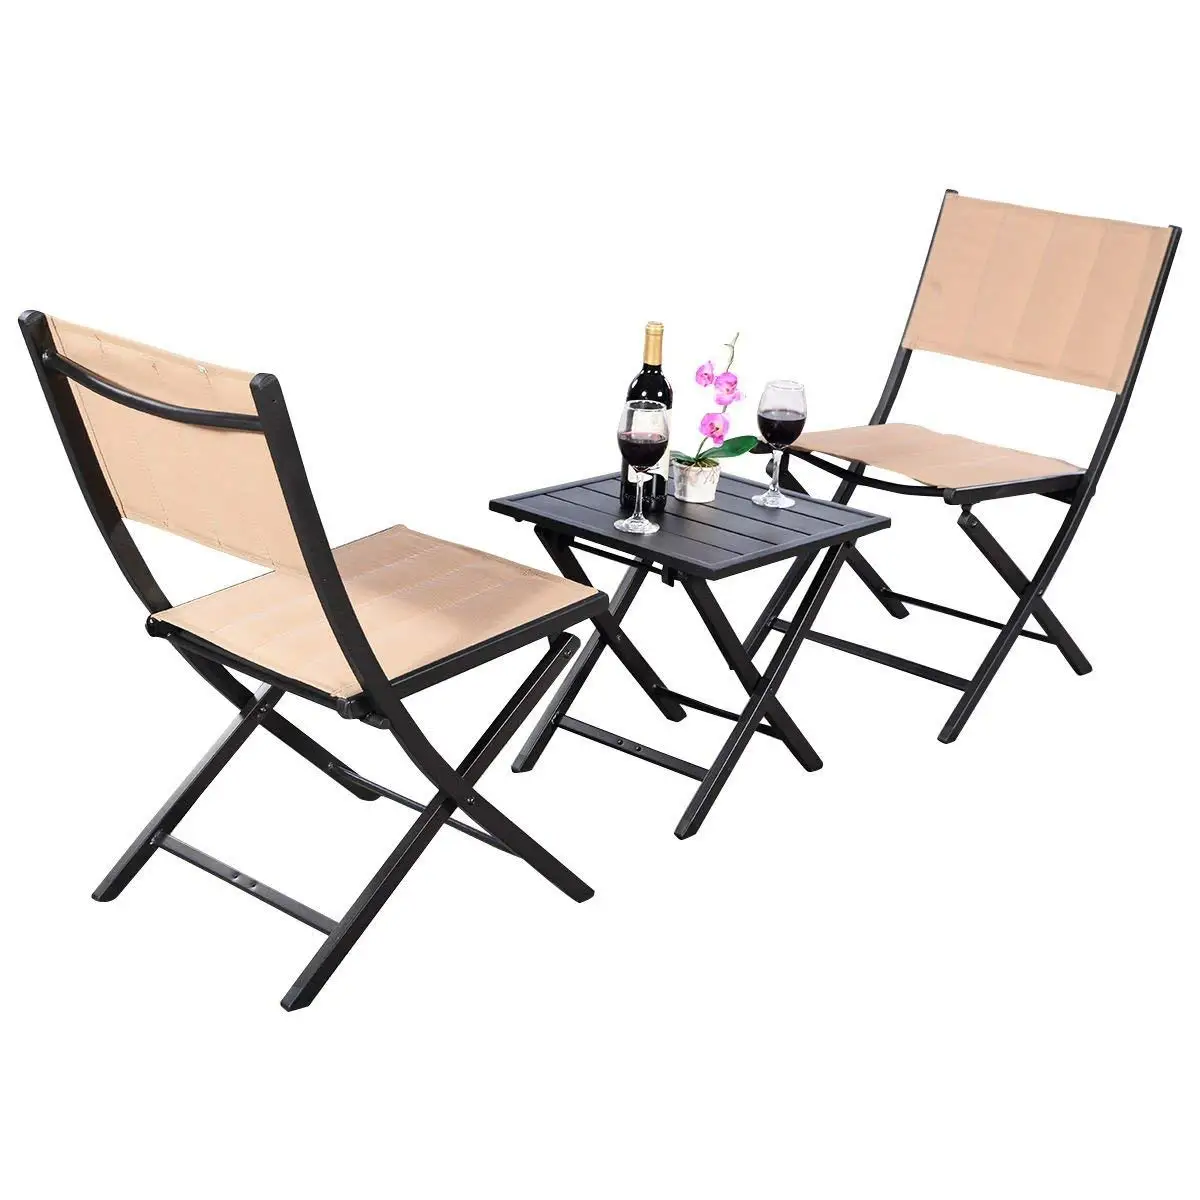 Cheap Outdoor Table And Chairs, find Outdoor Table And Chairs deals on